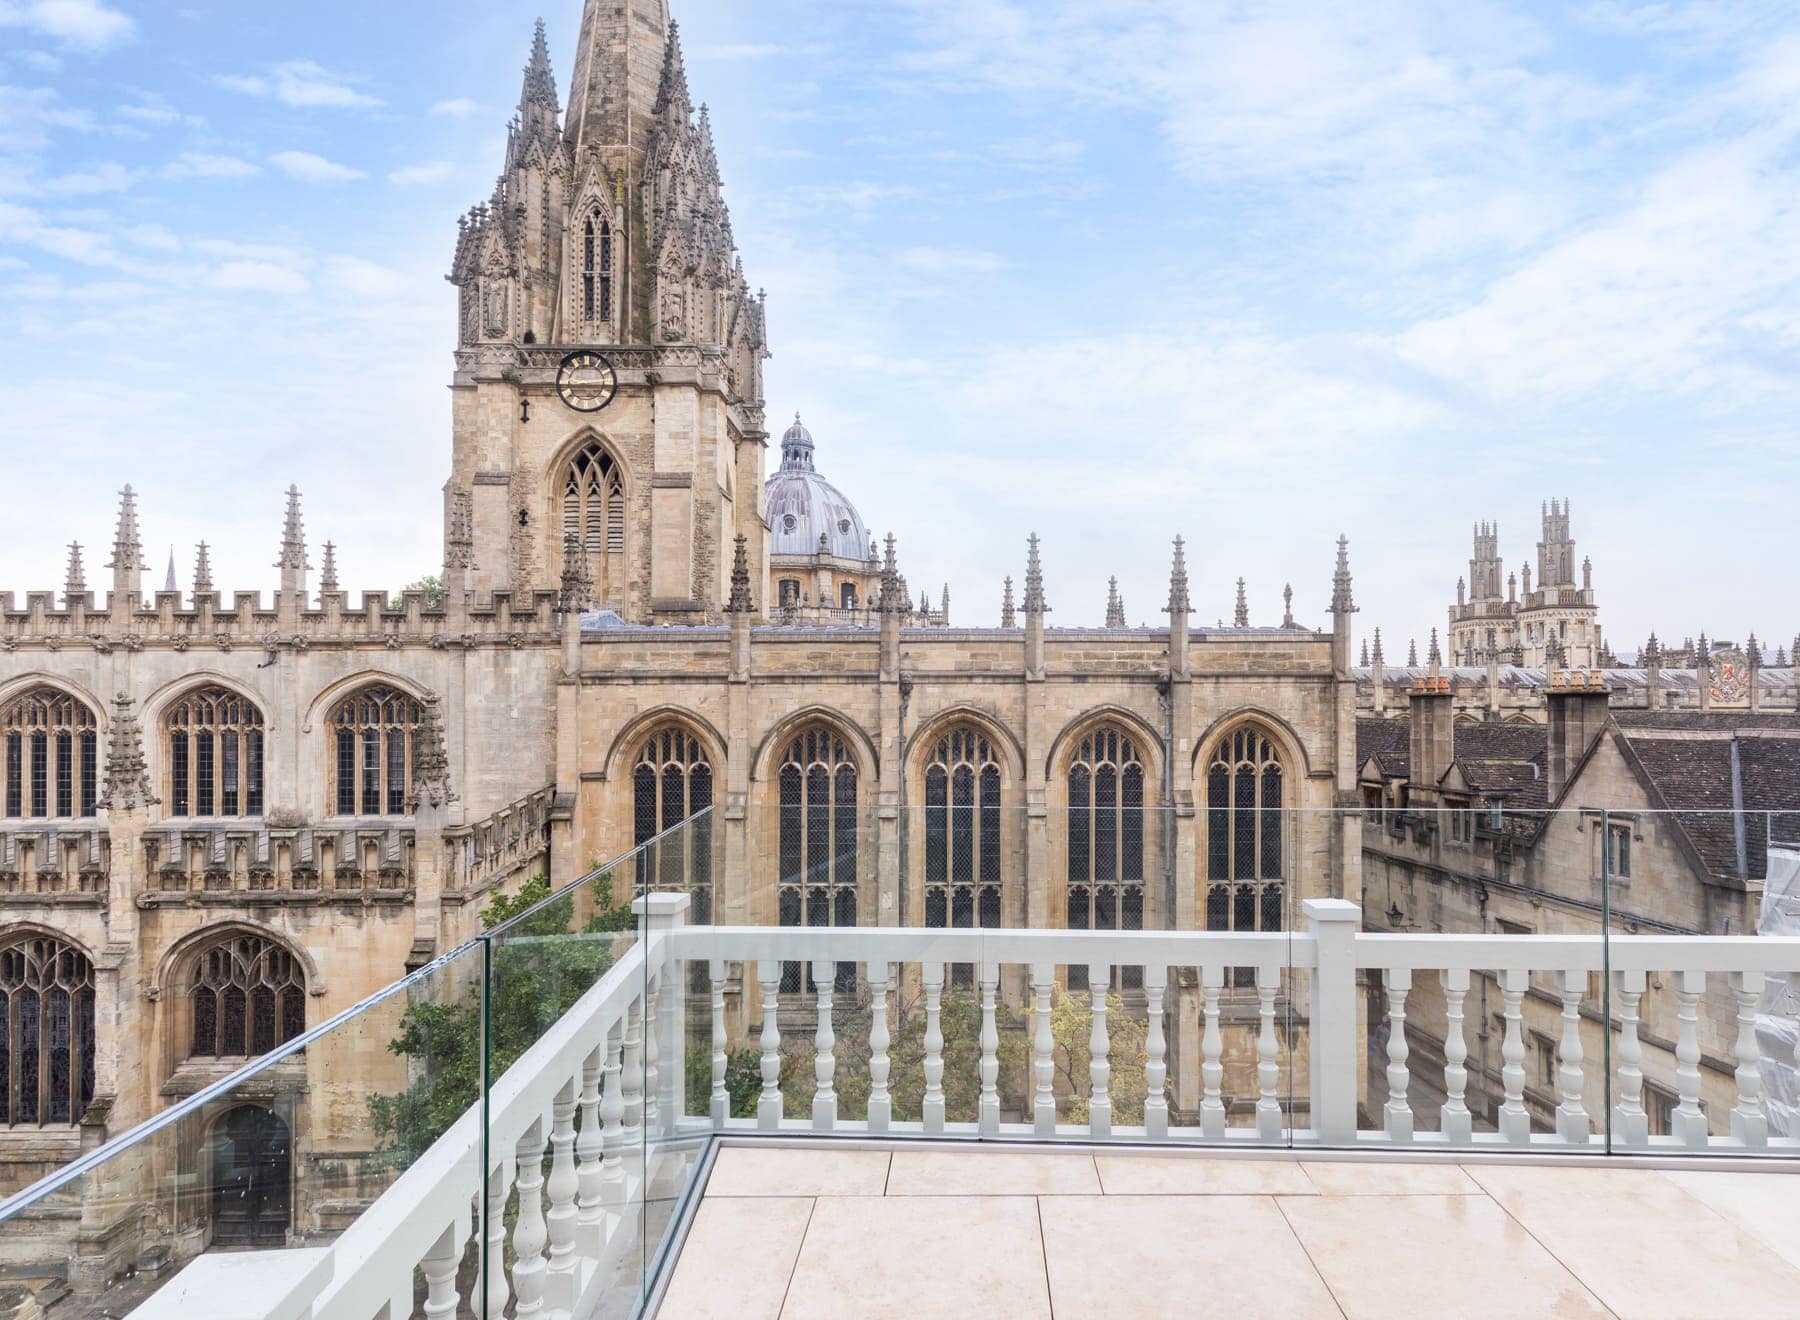 0002-2017-Old-Bank-Hotel-Oxford-Low-Res-Room-1-Balcony-View-High-Street-Spires-Web-Hero